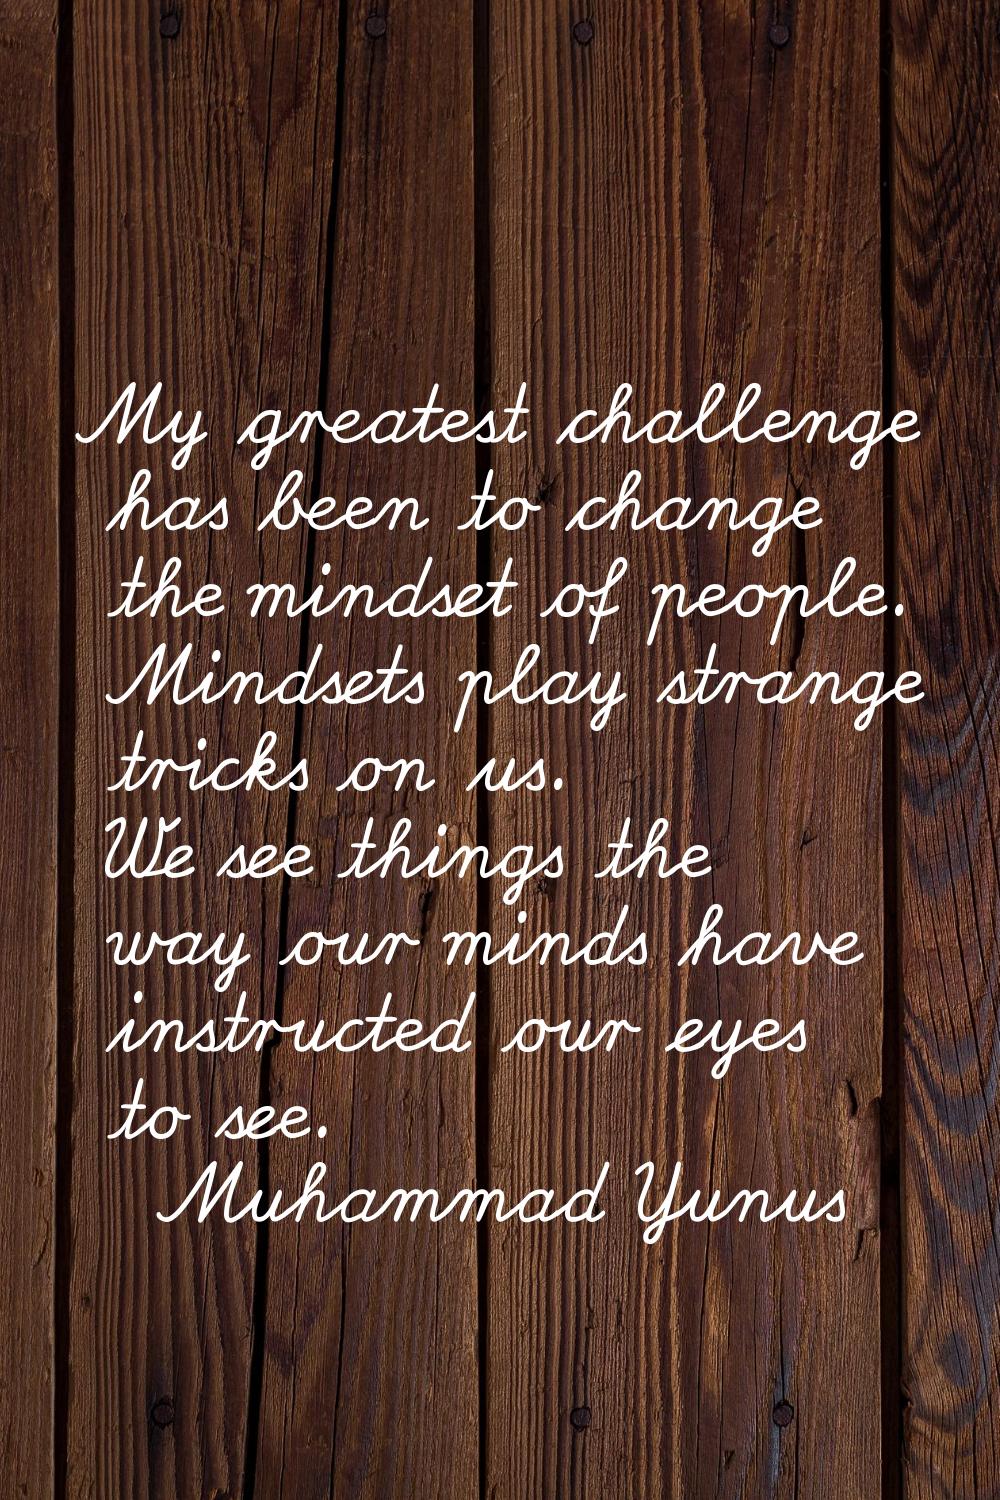 My greatest challenge has been to change the mindset of people. Mindsets play strange tricks on us.